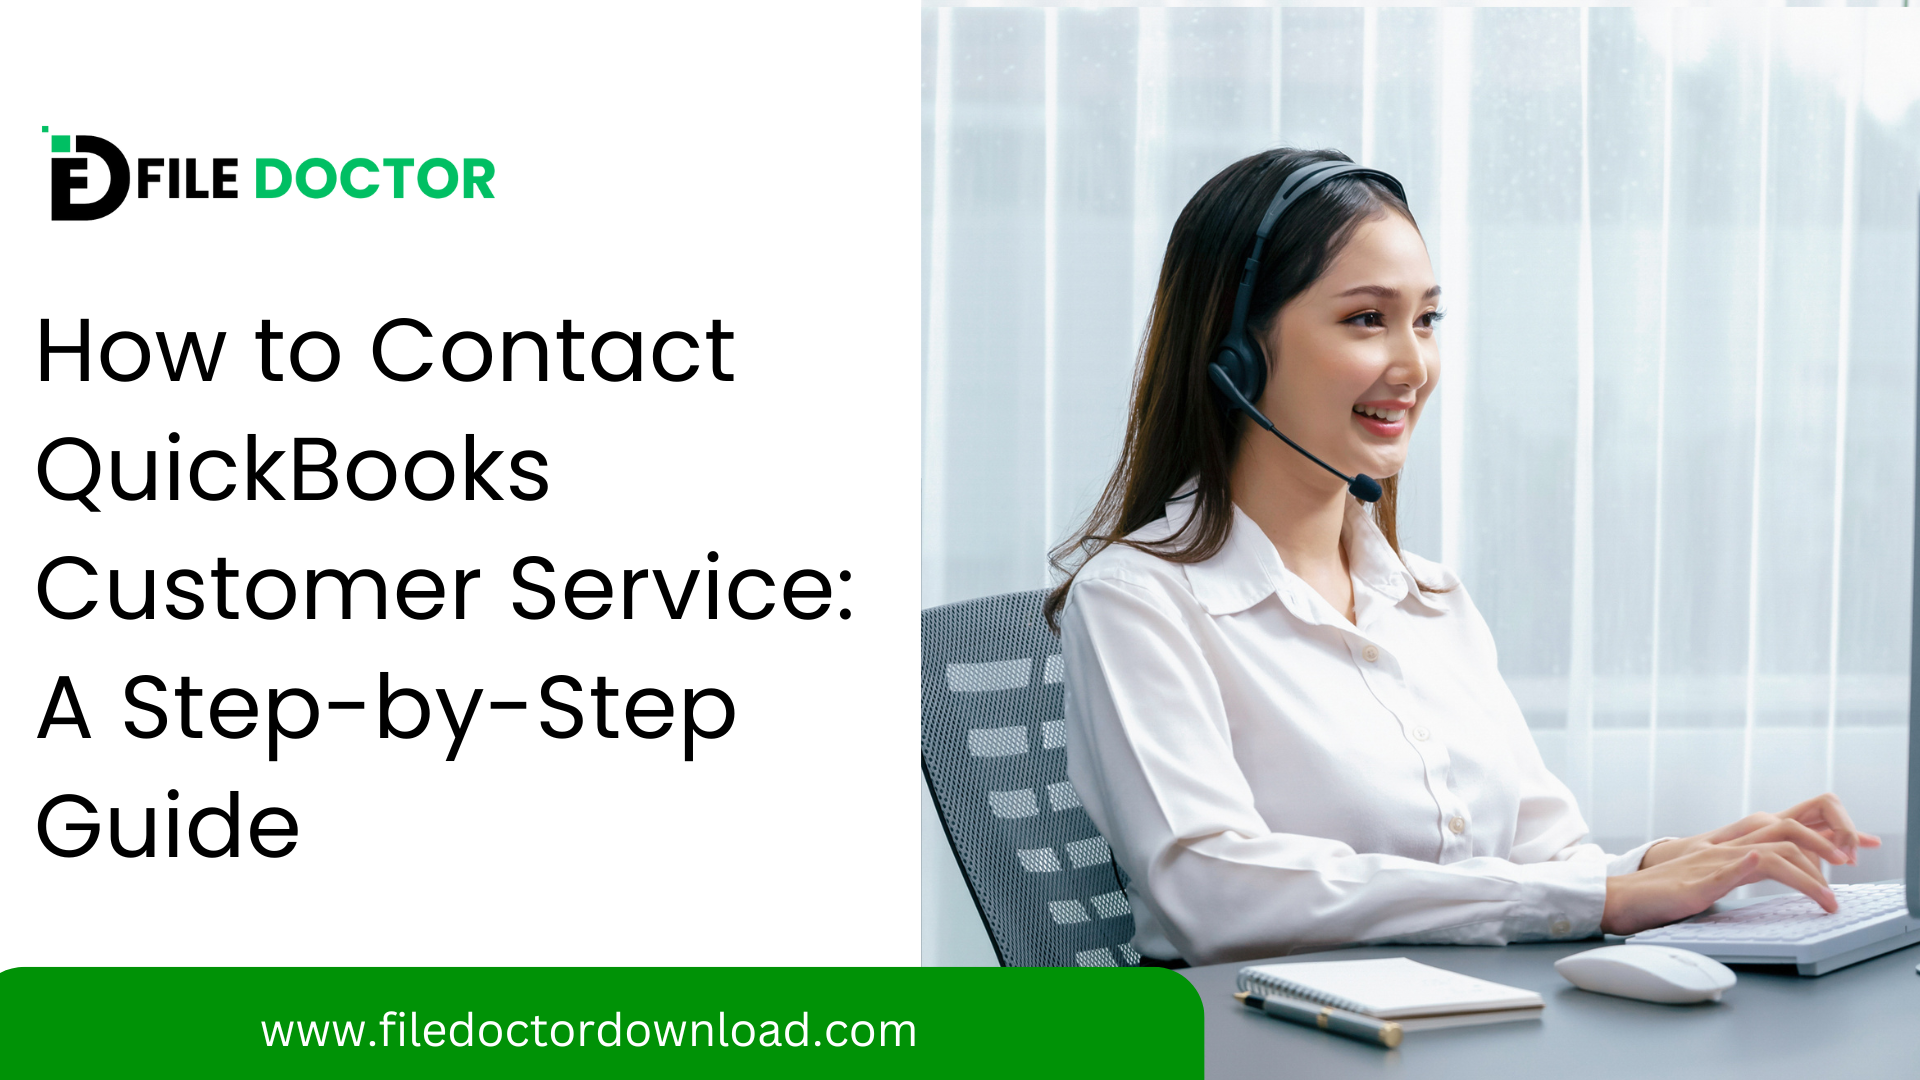 How to Contact QuickBooks Customer Service: A Step-by-Step Guide